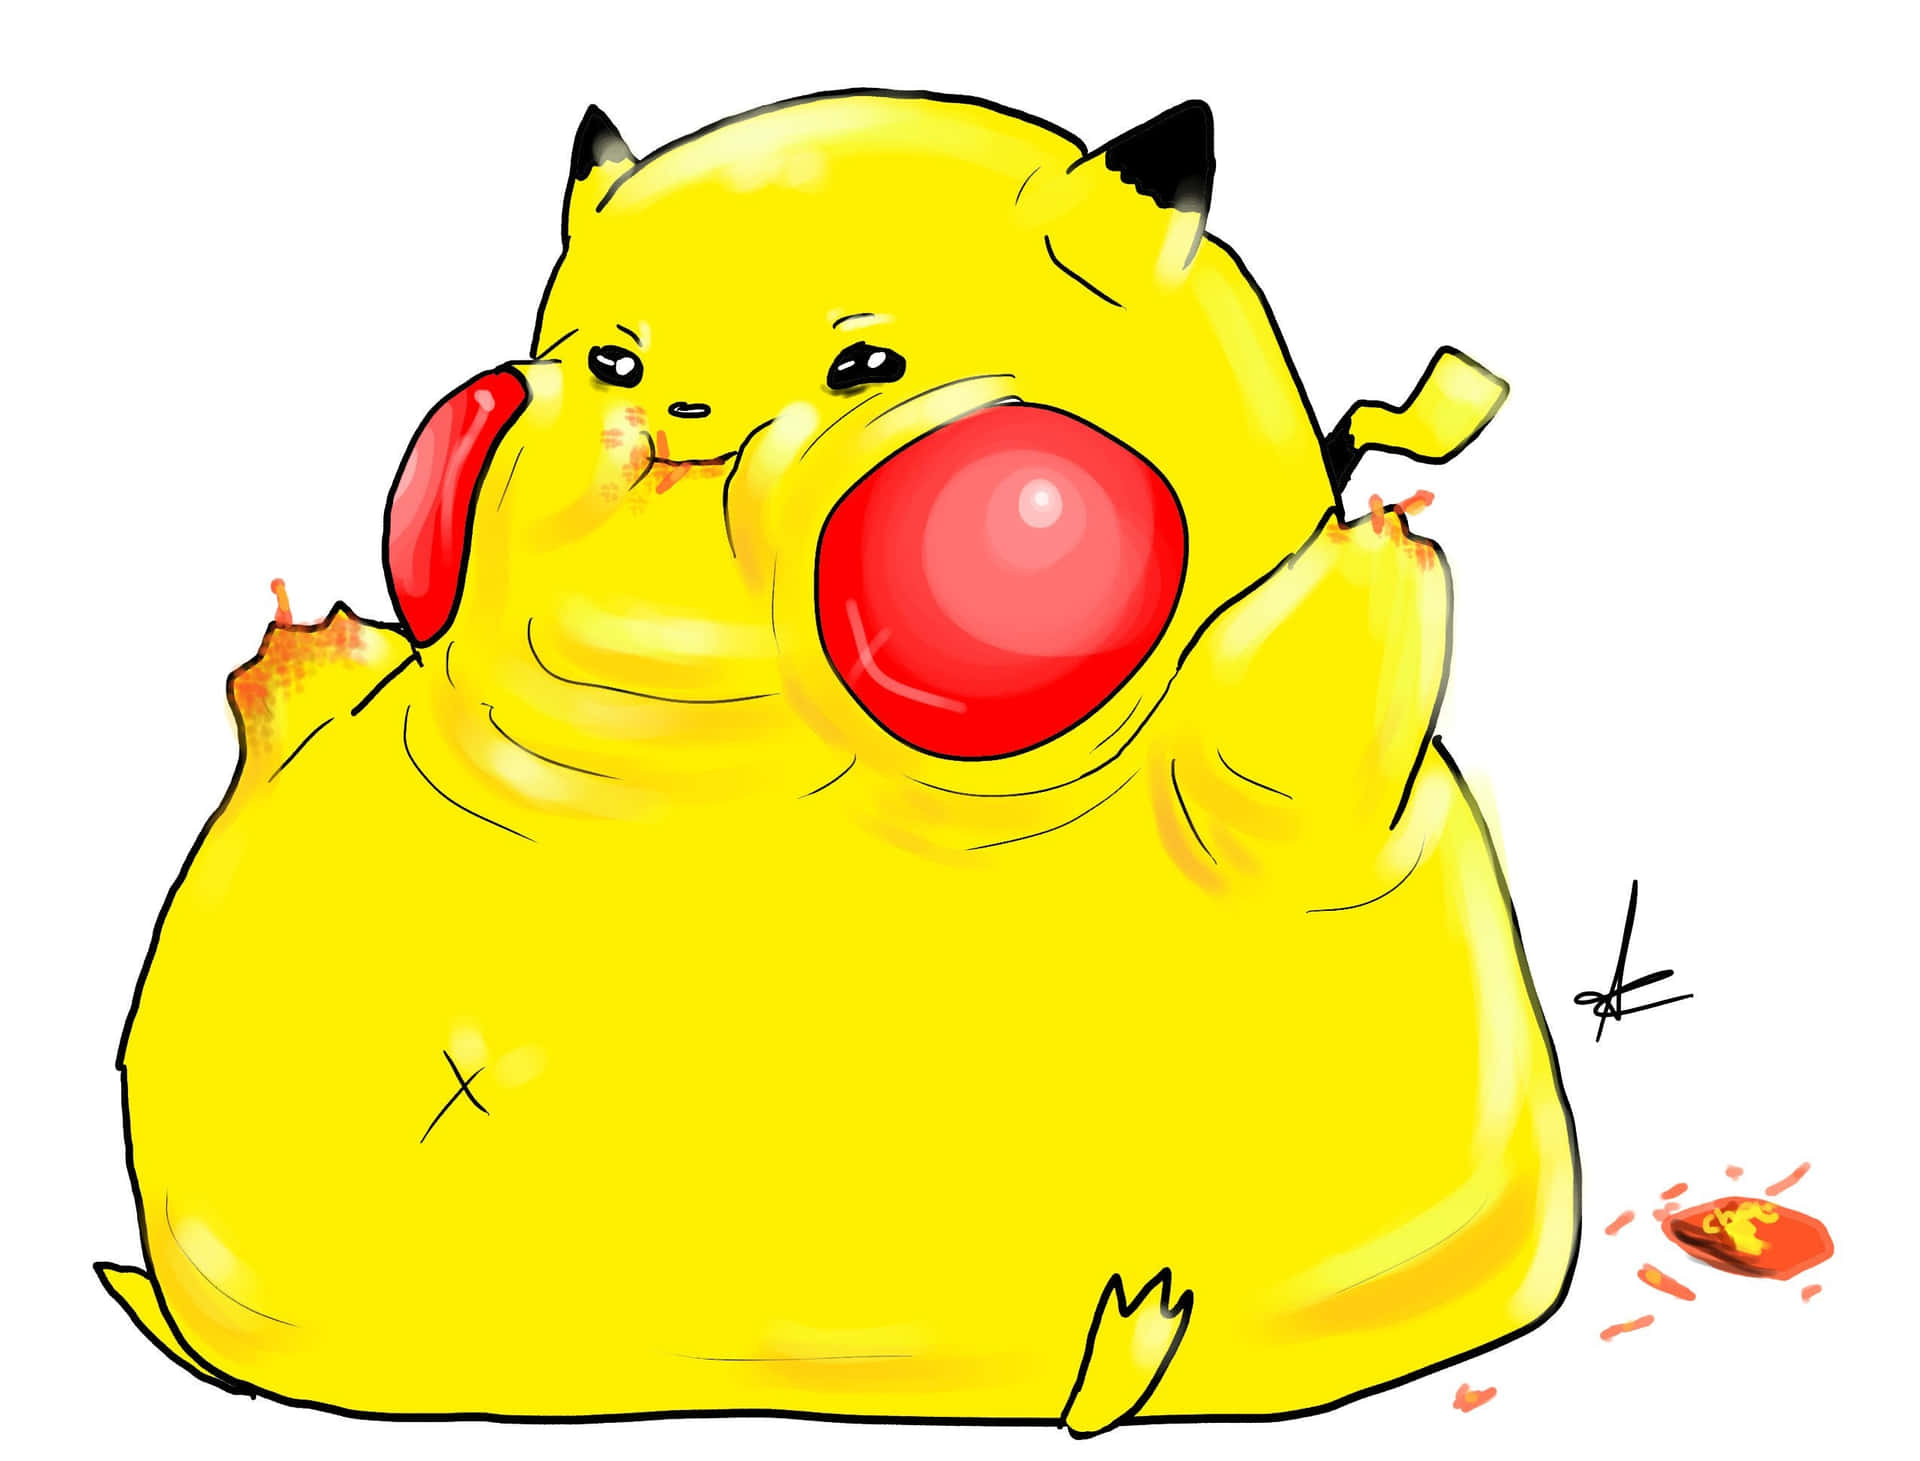 Cute Pikachu Is Chatting with Friends